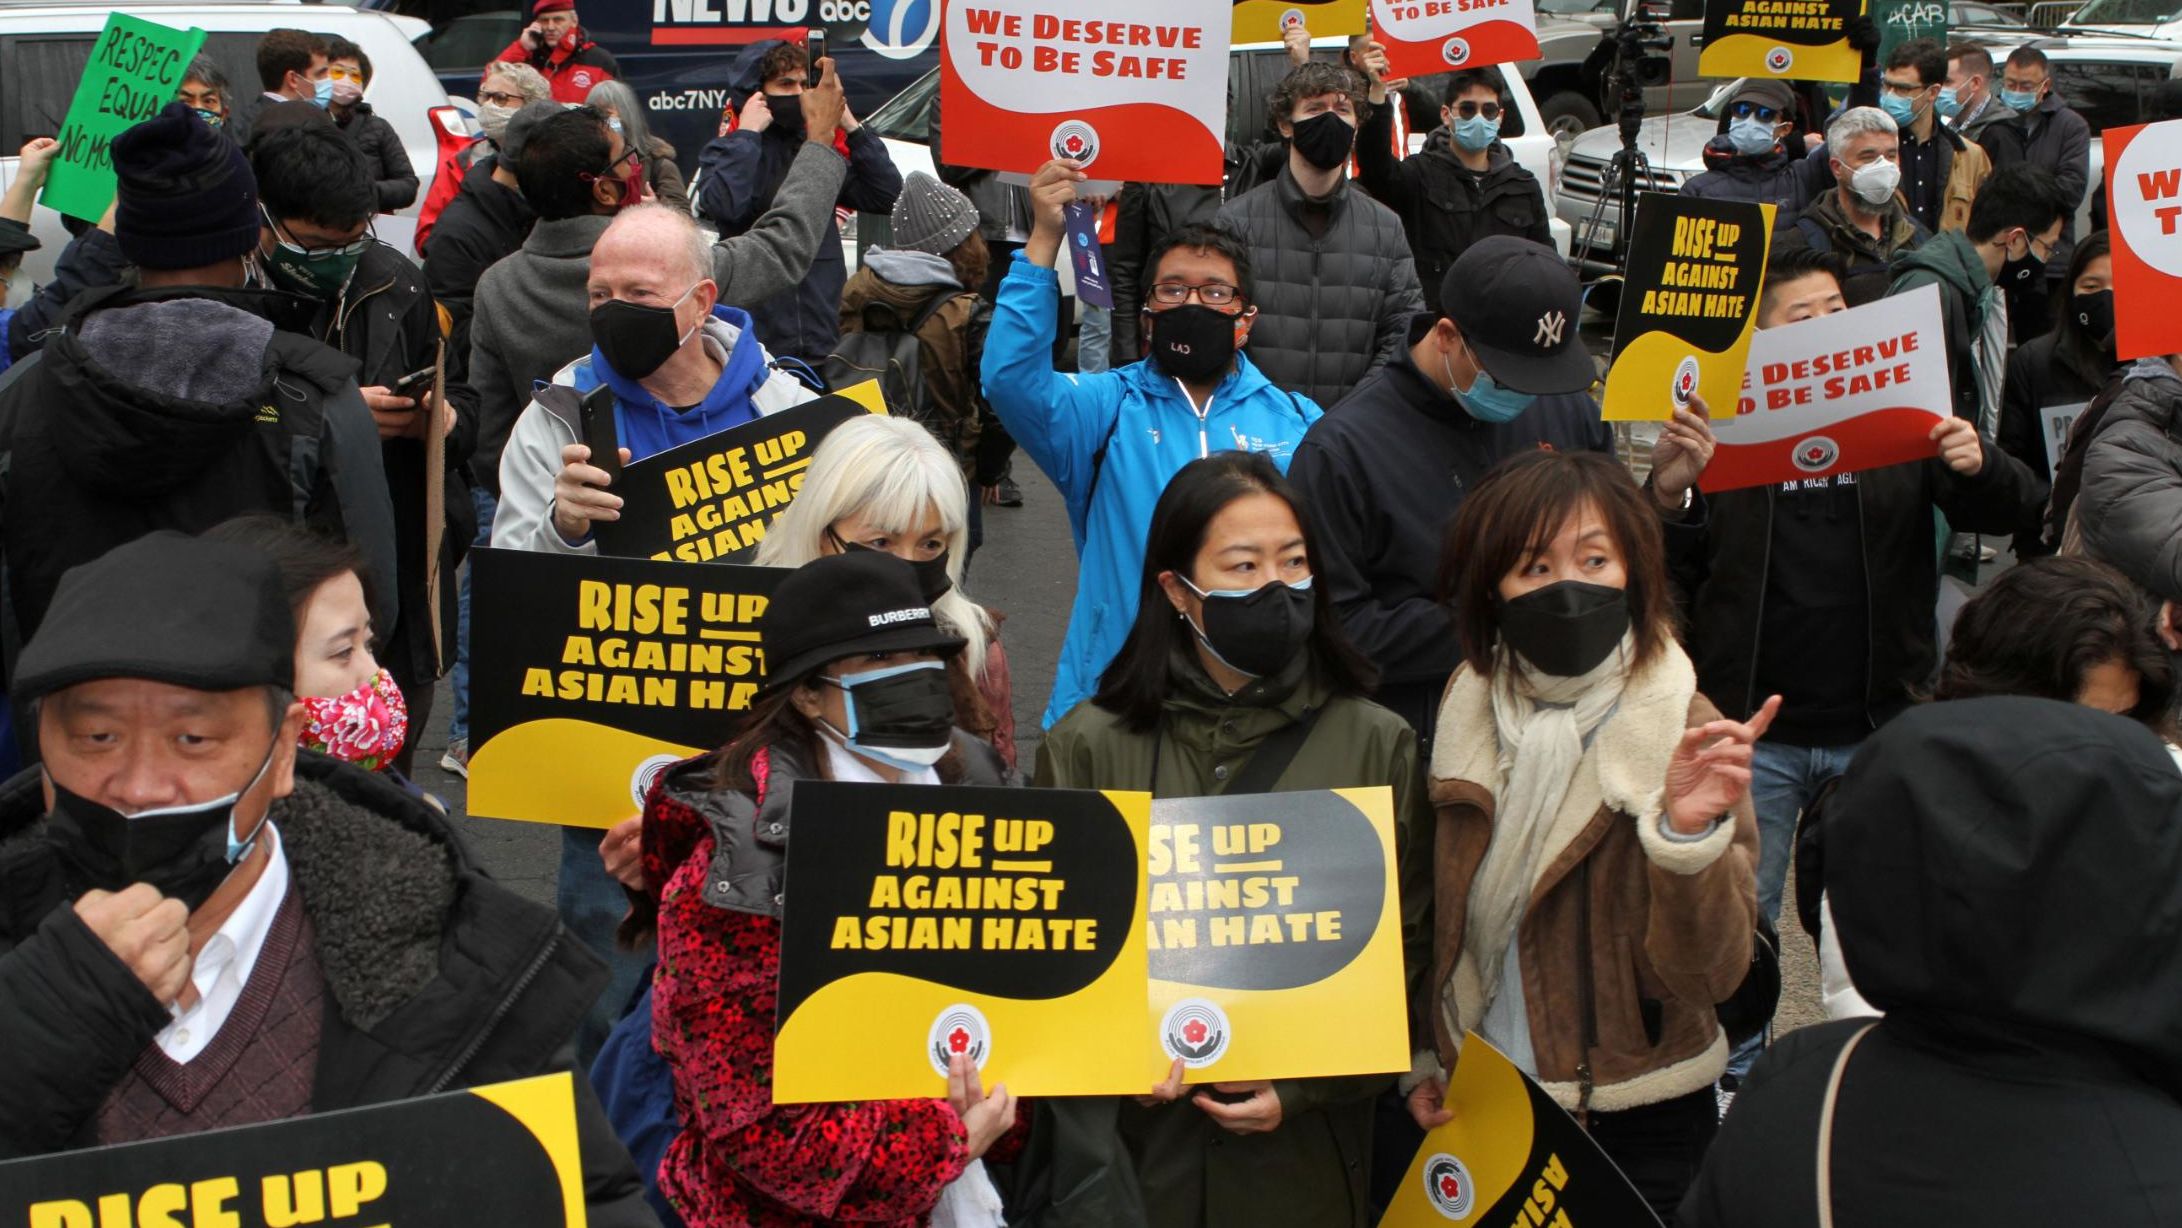 The rally was held to protest an increase in violence against Asian Americans. 